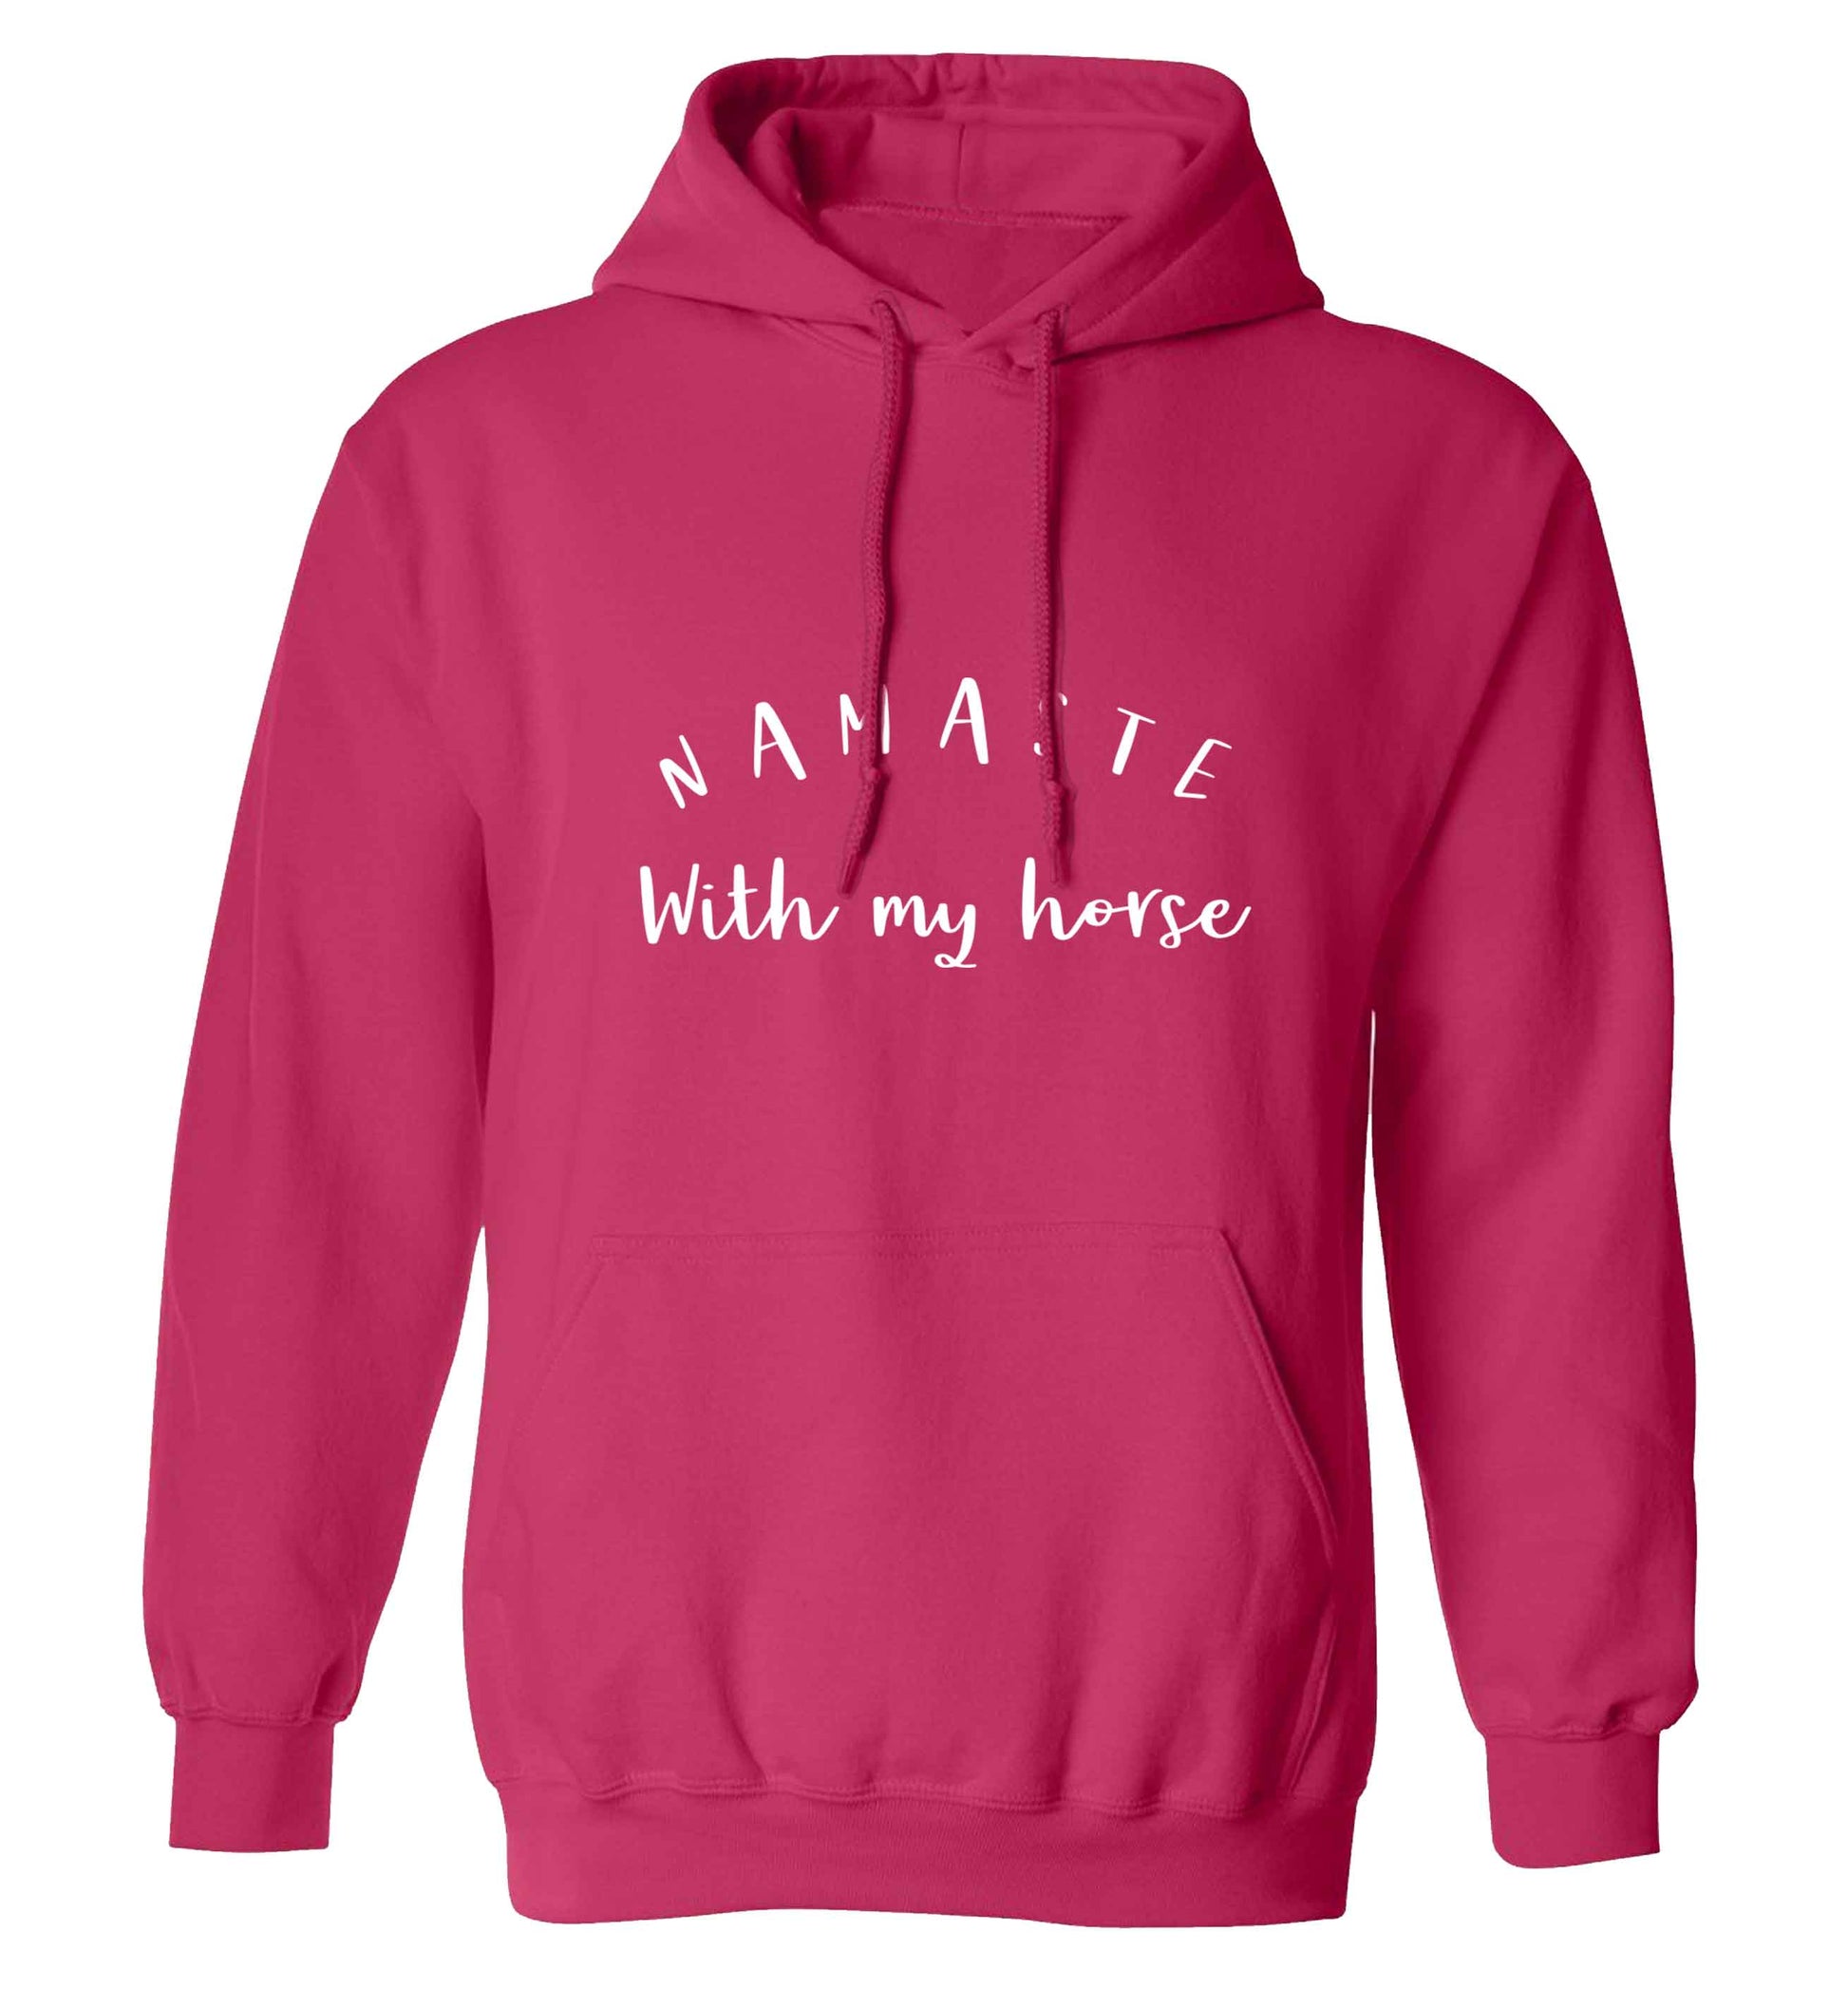 Namaste with my horse adults unisex pink hoodie 2XL